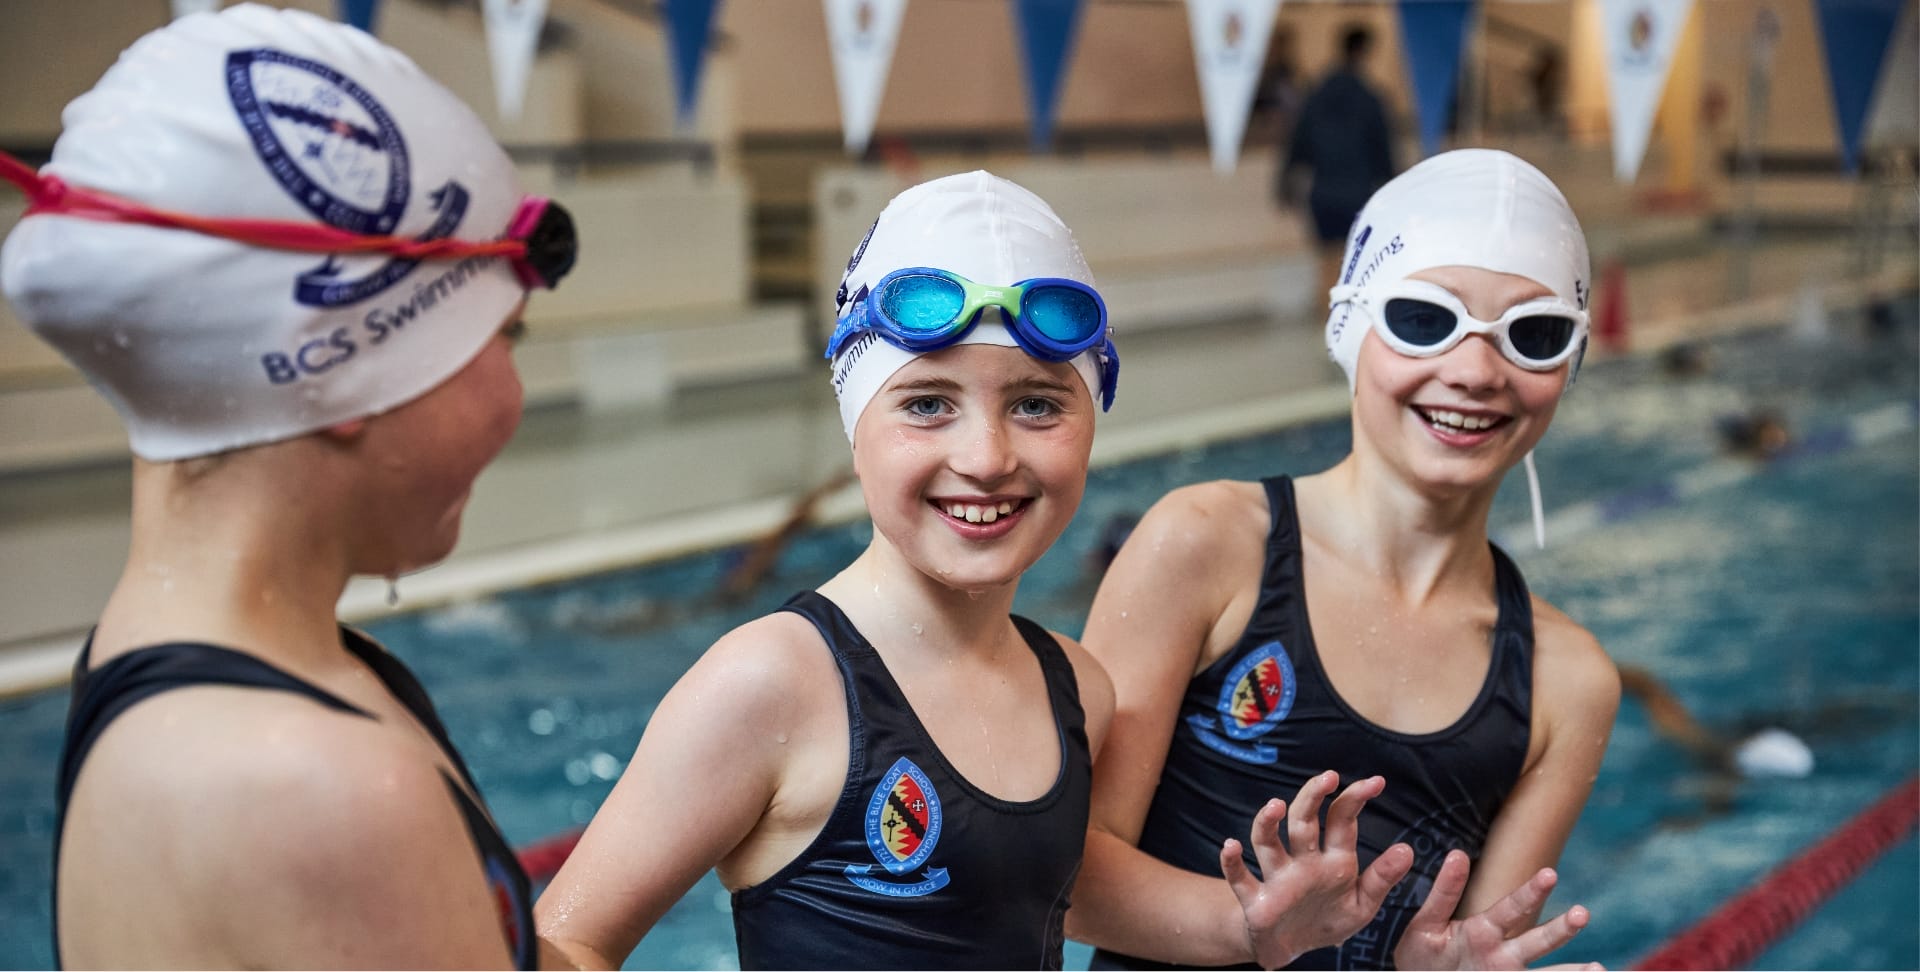 Three girls wearing BCS swimming hats, goggles and swimsuits at the swimming pool at The Blue Coat School.